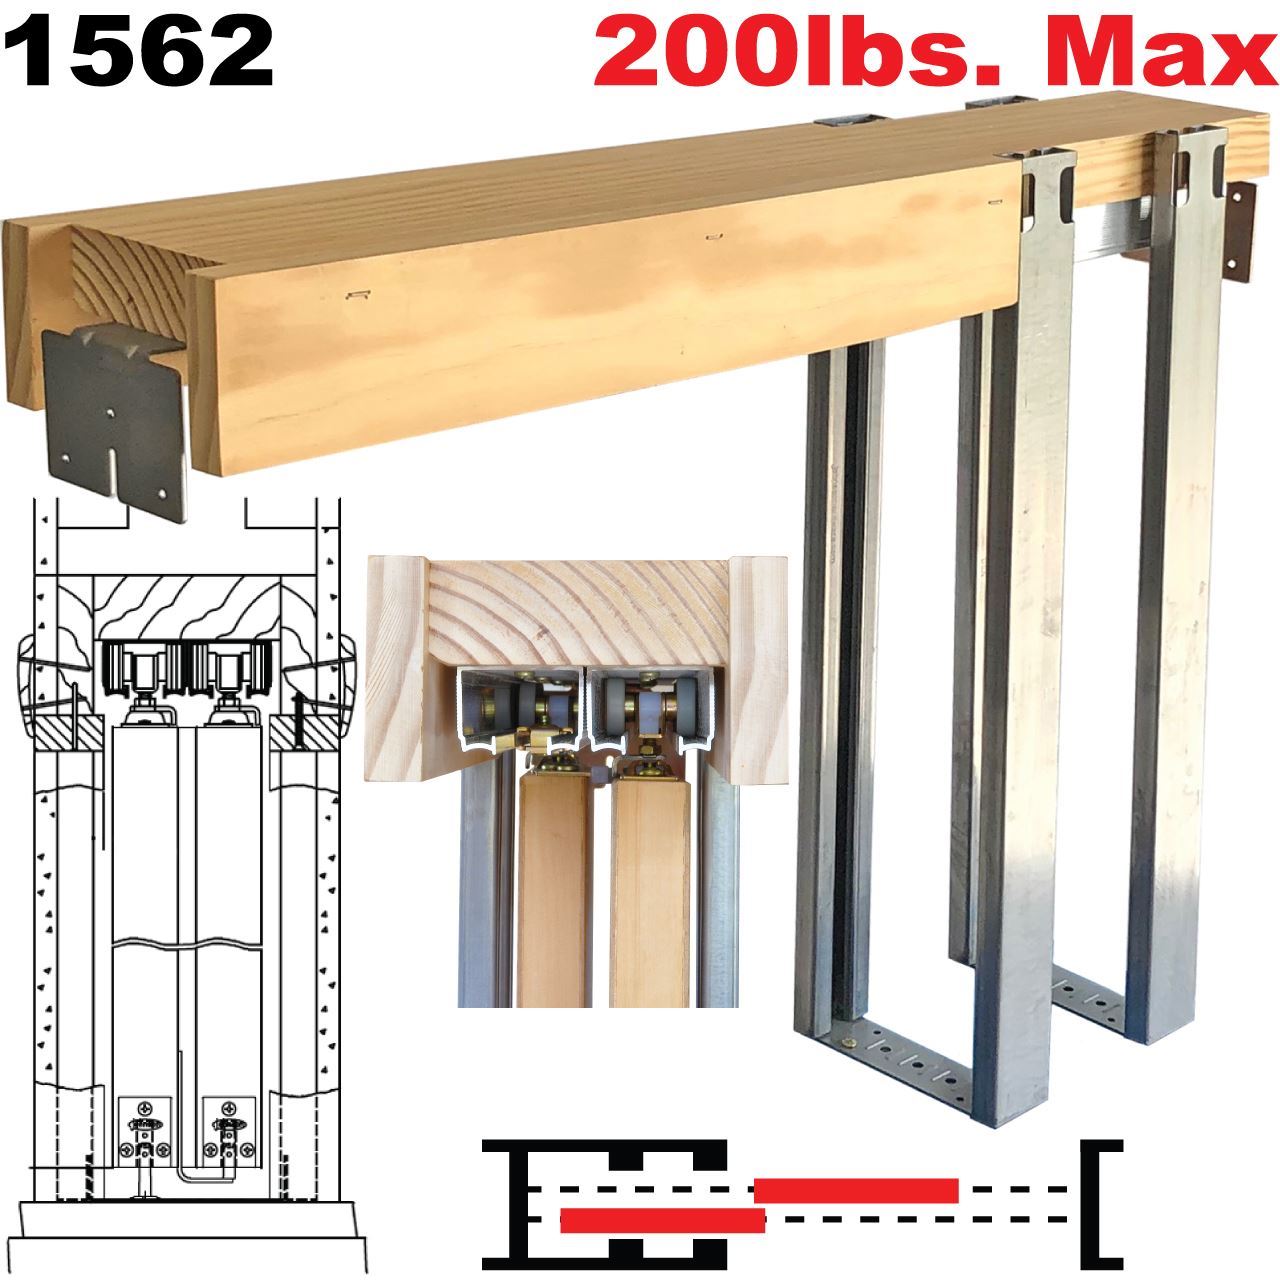 Picture of 1562 Series Bypass Pocket Door Frame Kits.